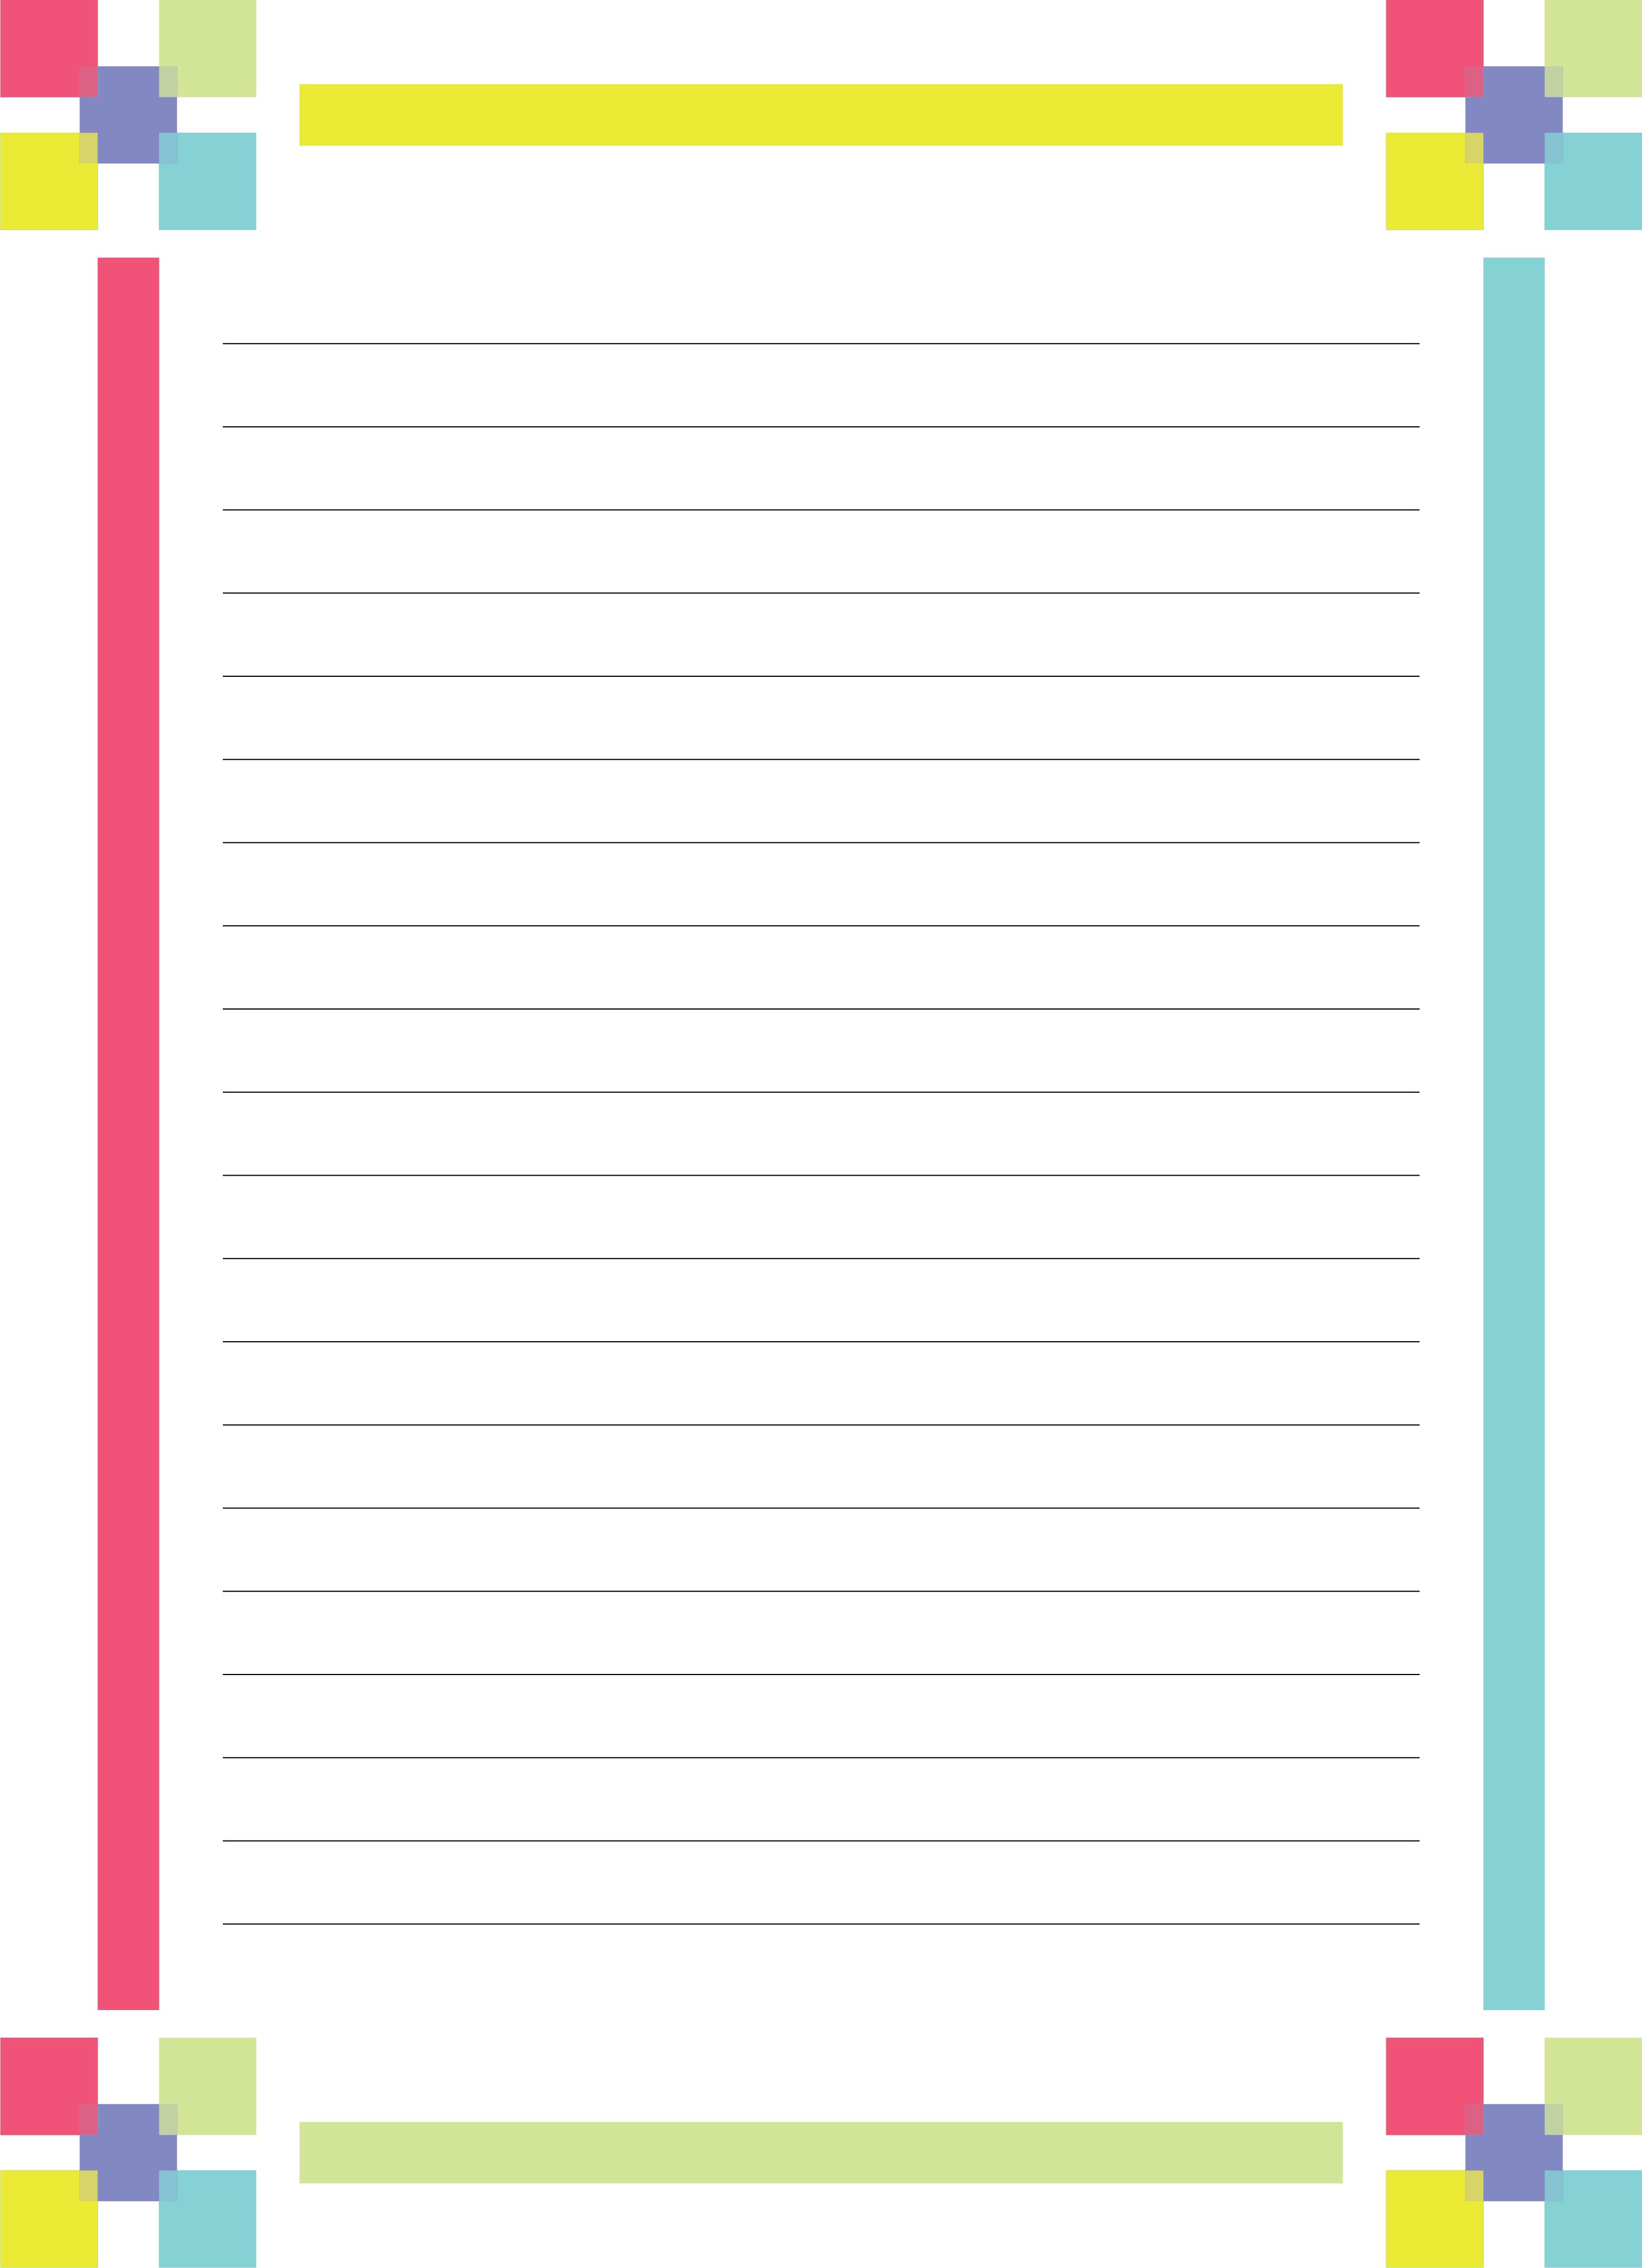 7-best-images-of-dog-free-printable-lined-writing-paper-with-borders